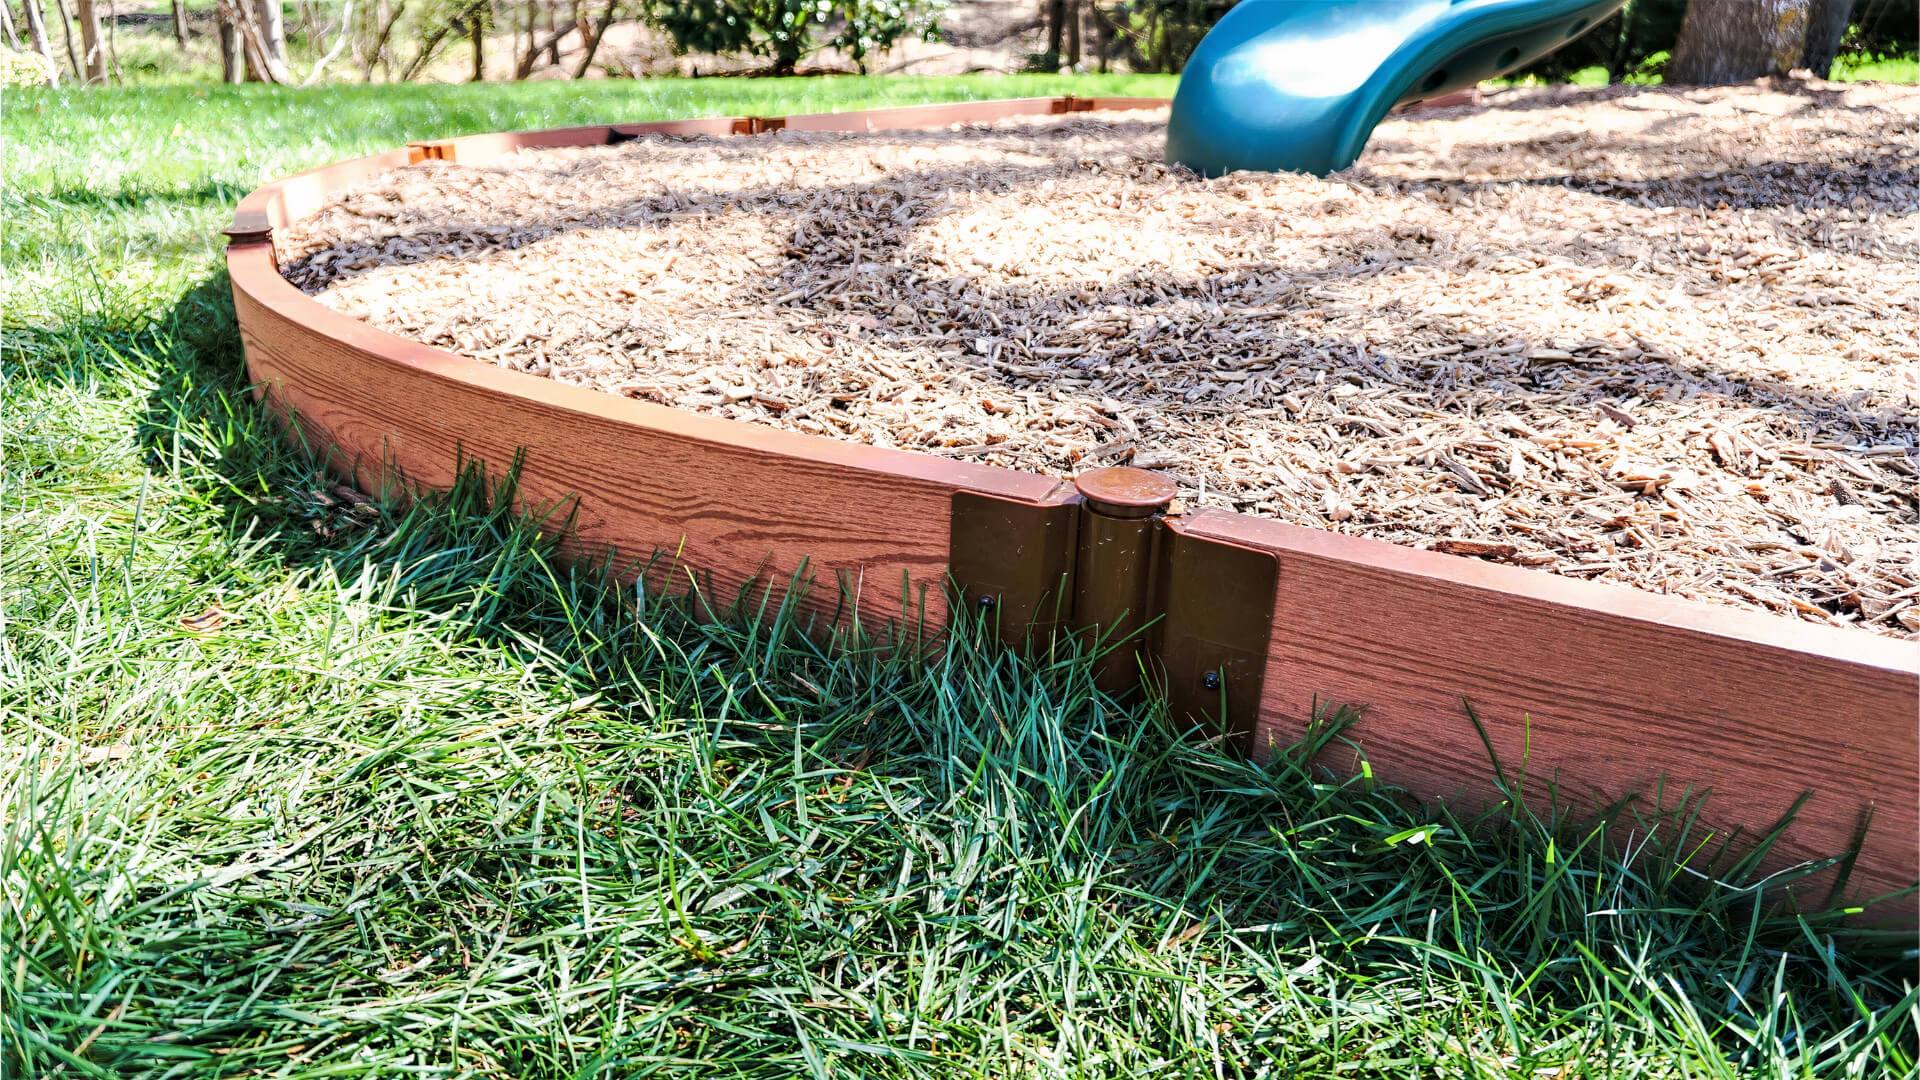 Tool-Free Playground Border Edging Kit - Curved Boards Playground Borders Frame It All 